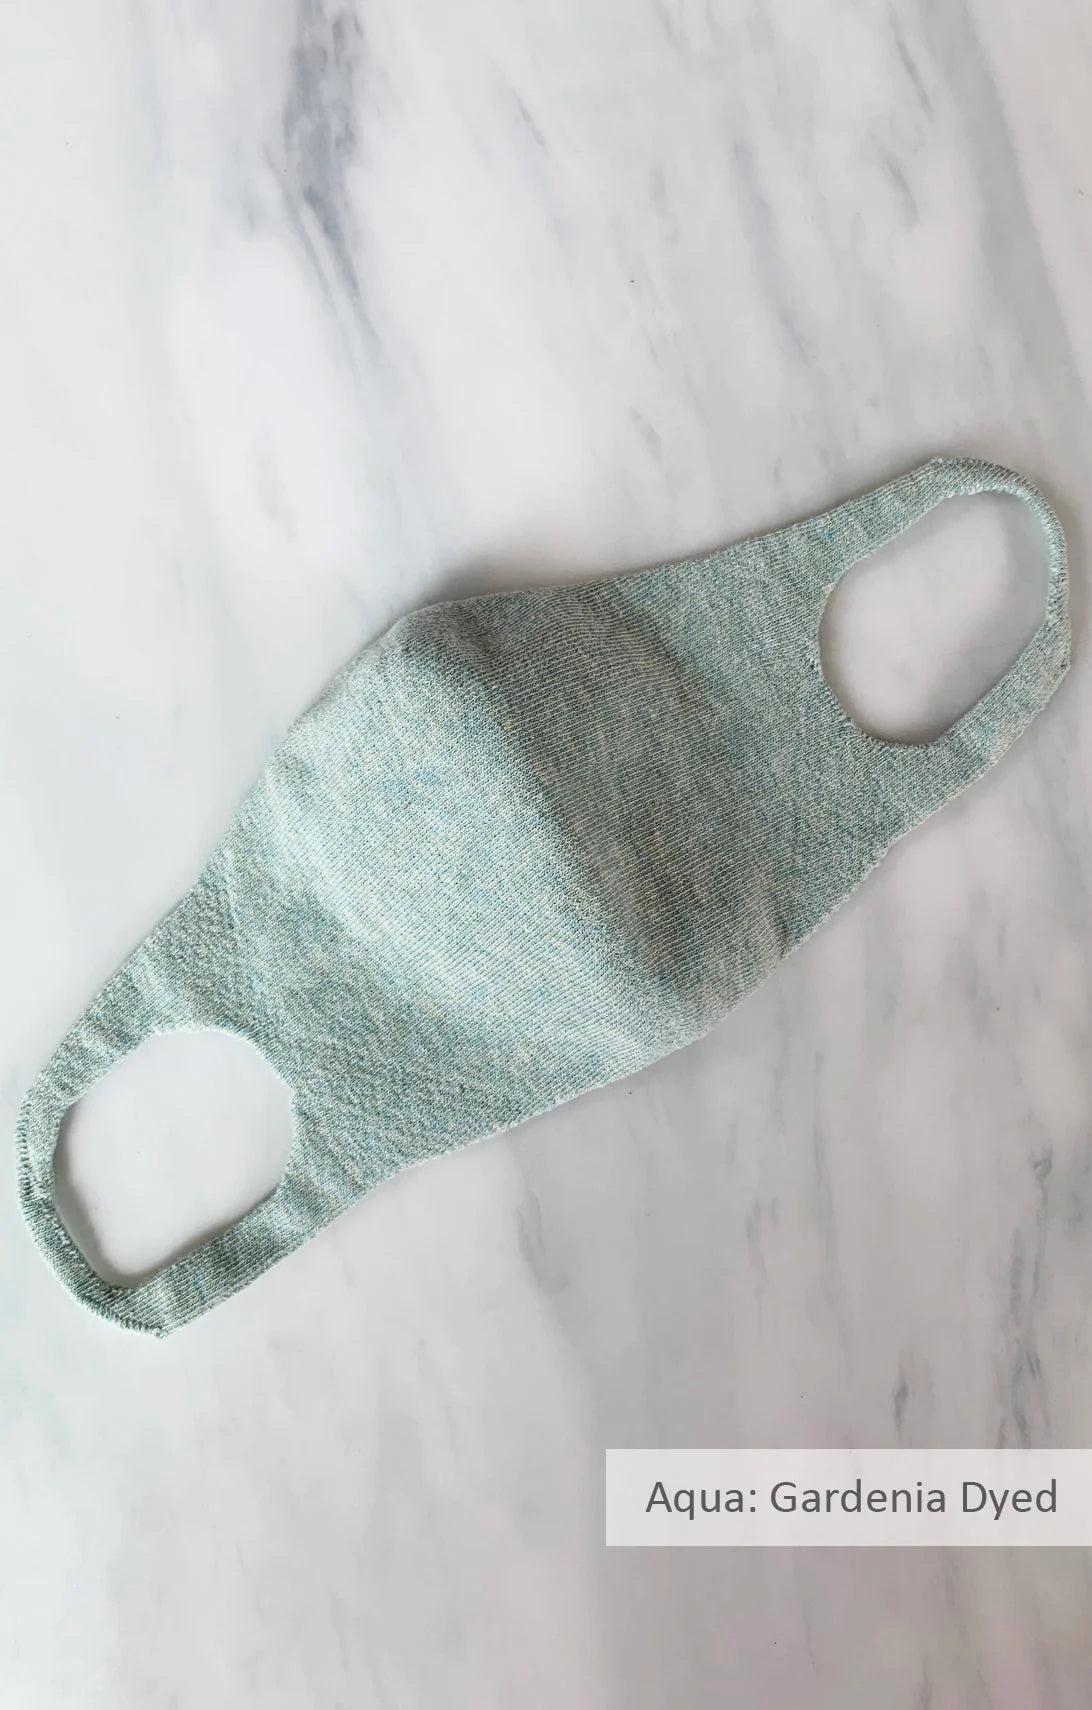 Aqua color of Botanical Dyed Organic Cotton Face Mask by Tabbisocks Wellness